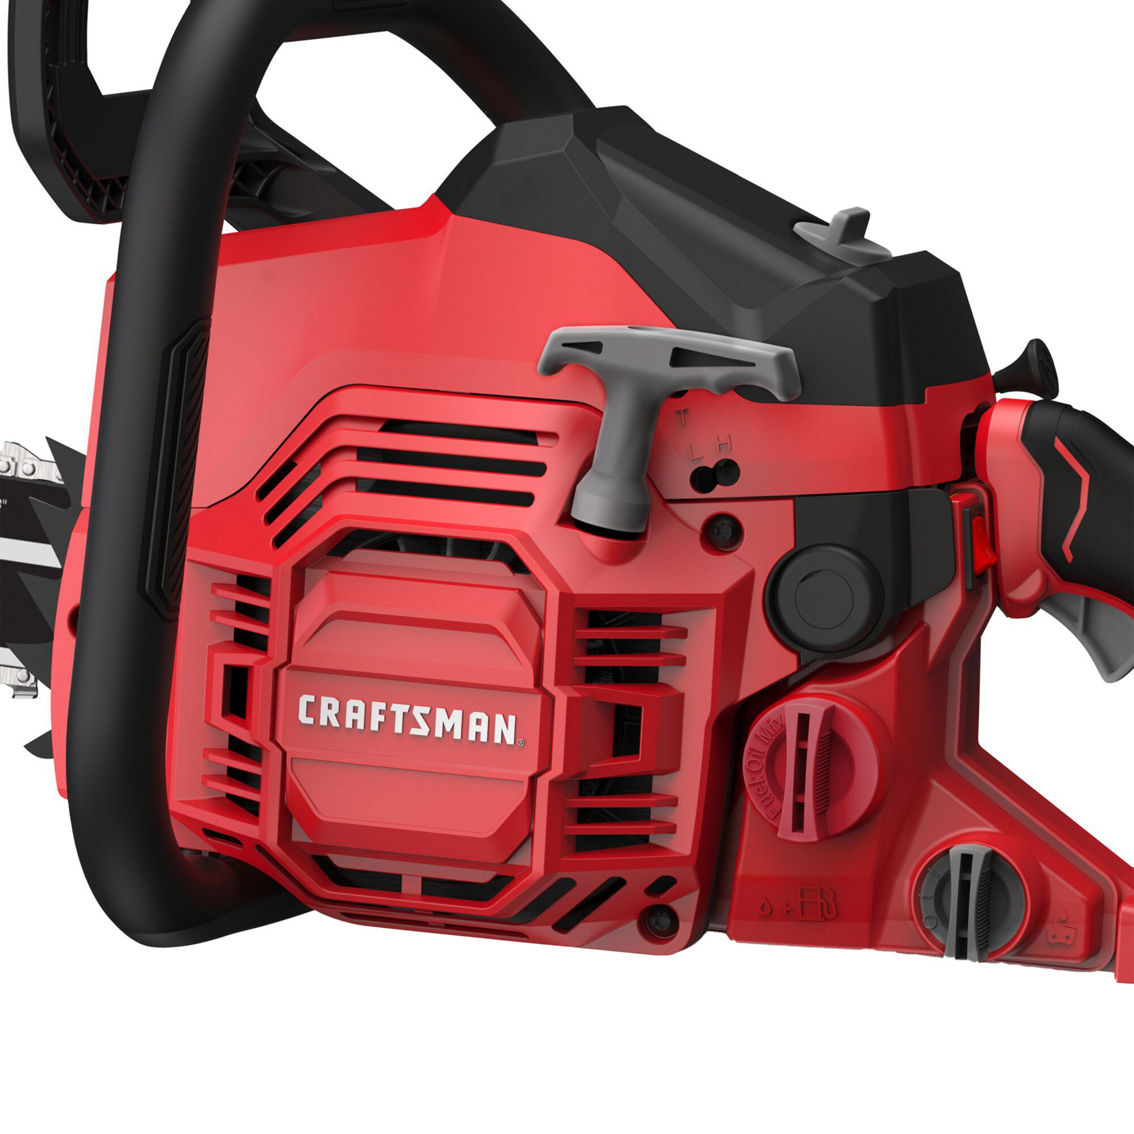 Craftsman 20-in. 46cc 2 Cycle Gas Chainsaw - Image 5 of 6